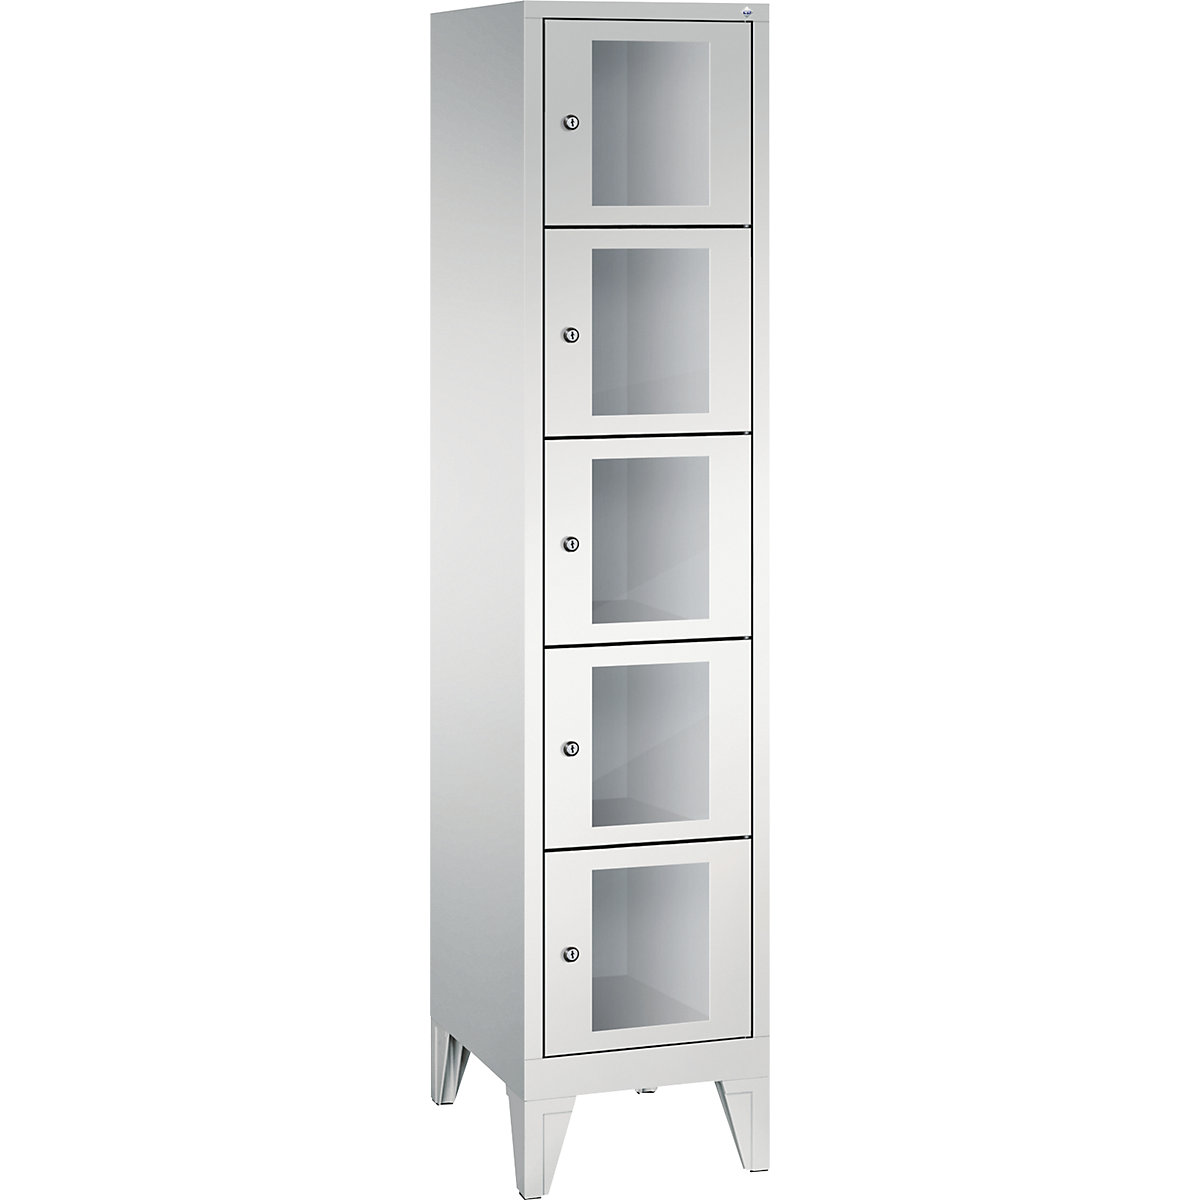 C+P – CLASSIC locker unit, compartment height 295 mm, with feet, 5 compartments, width 420 mm, light grey door